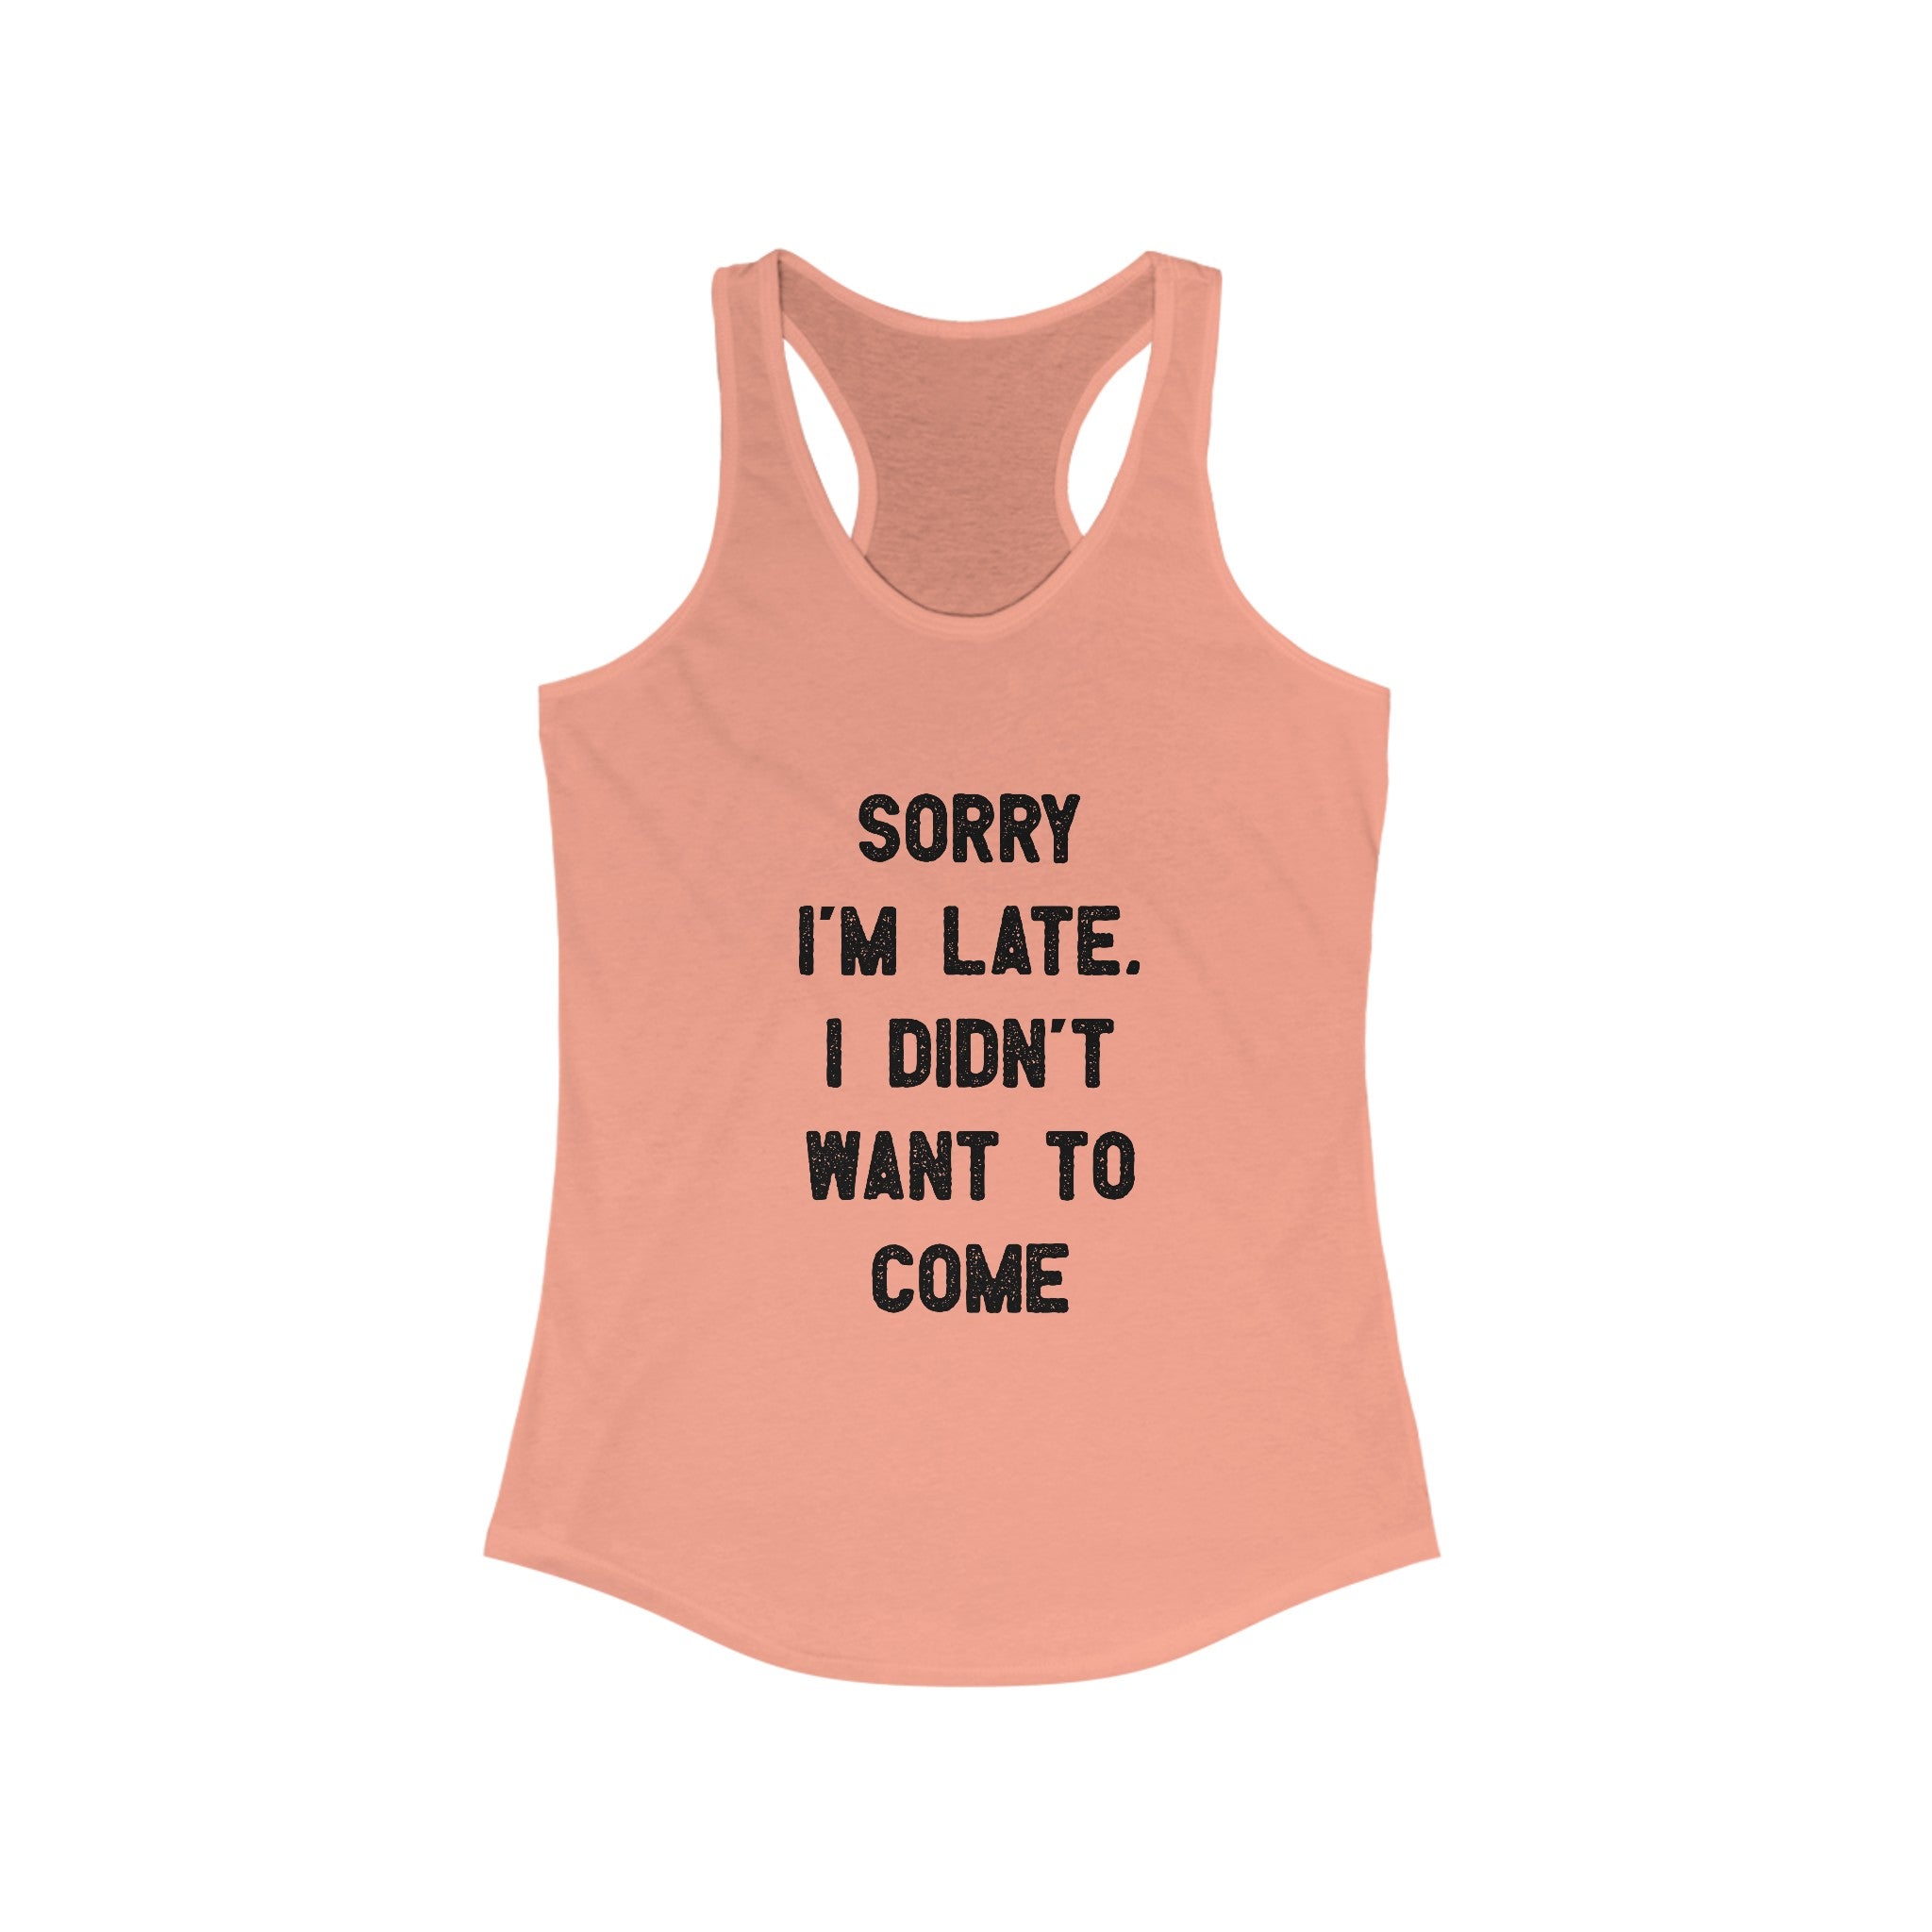 Sorry I'm Late I Didn't Want to Come - Women's Racerback Tank